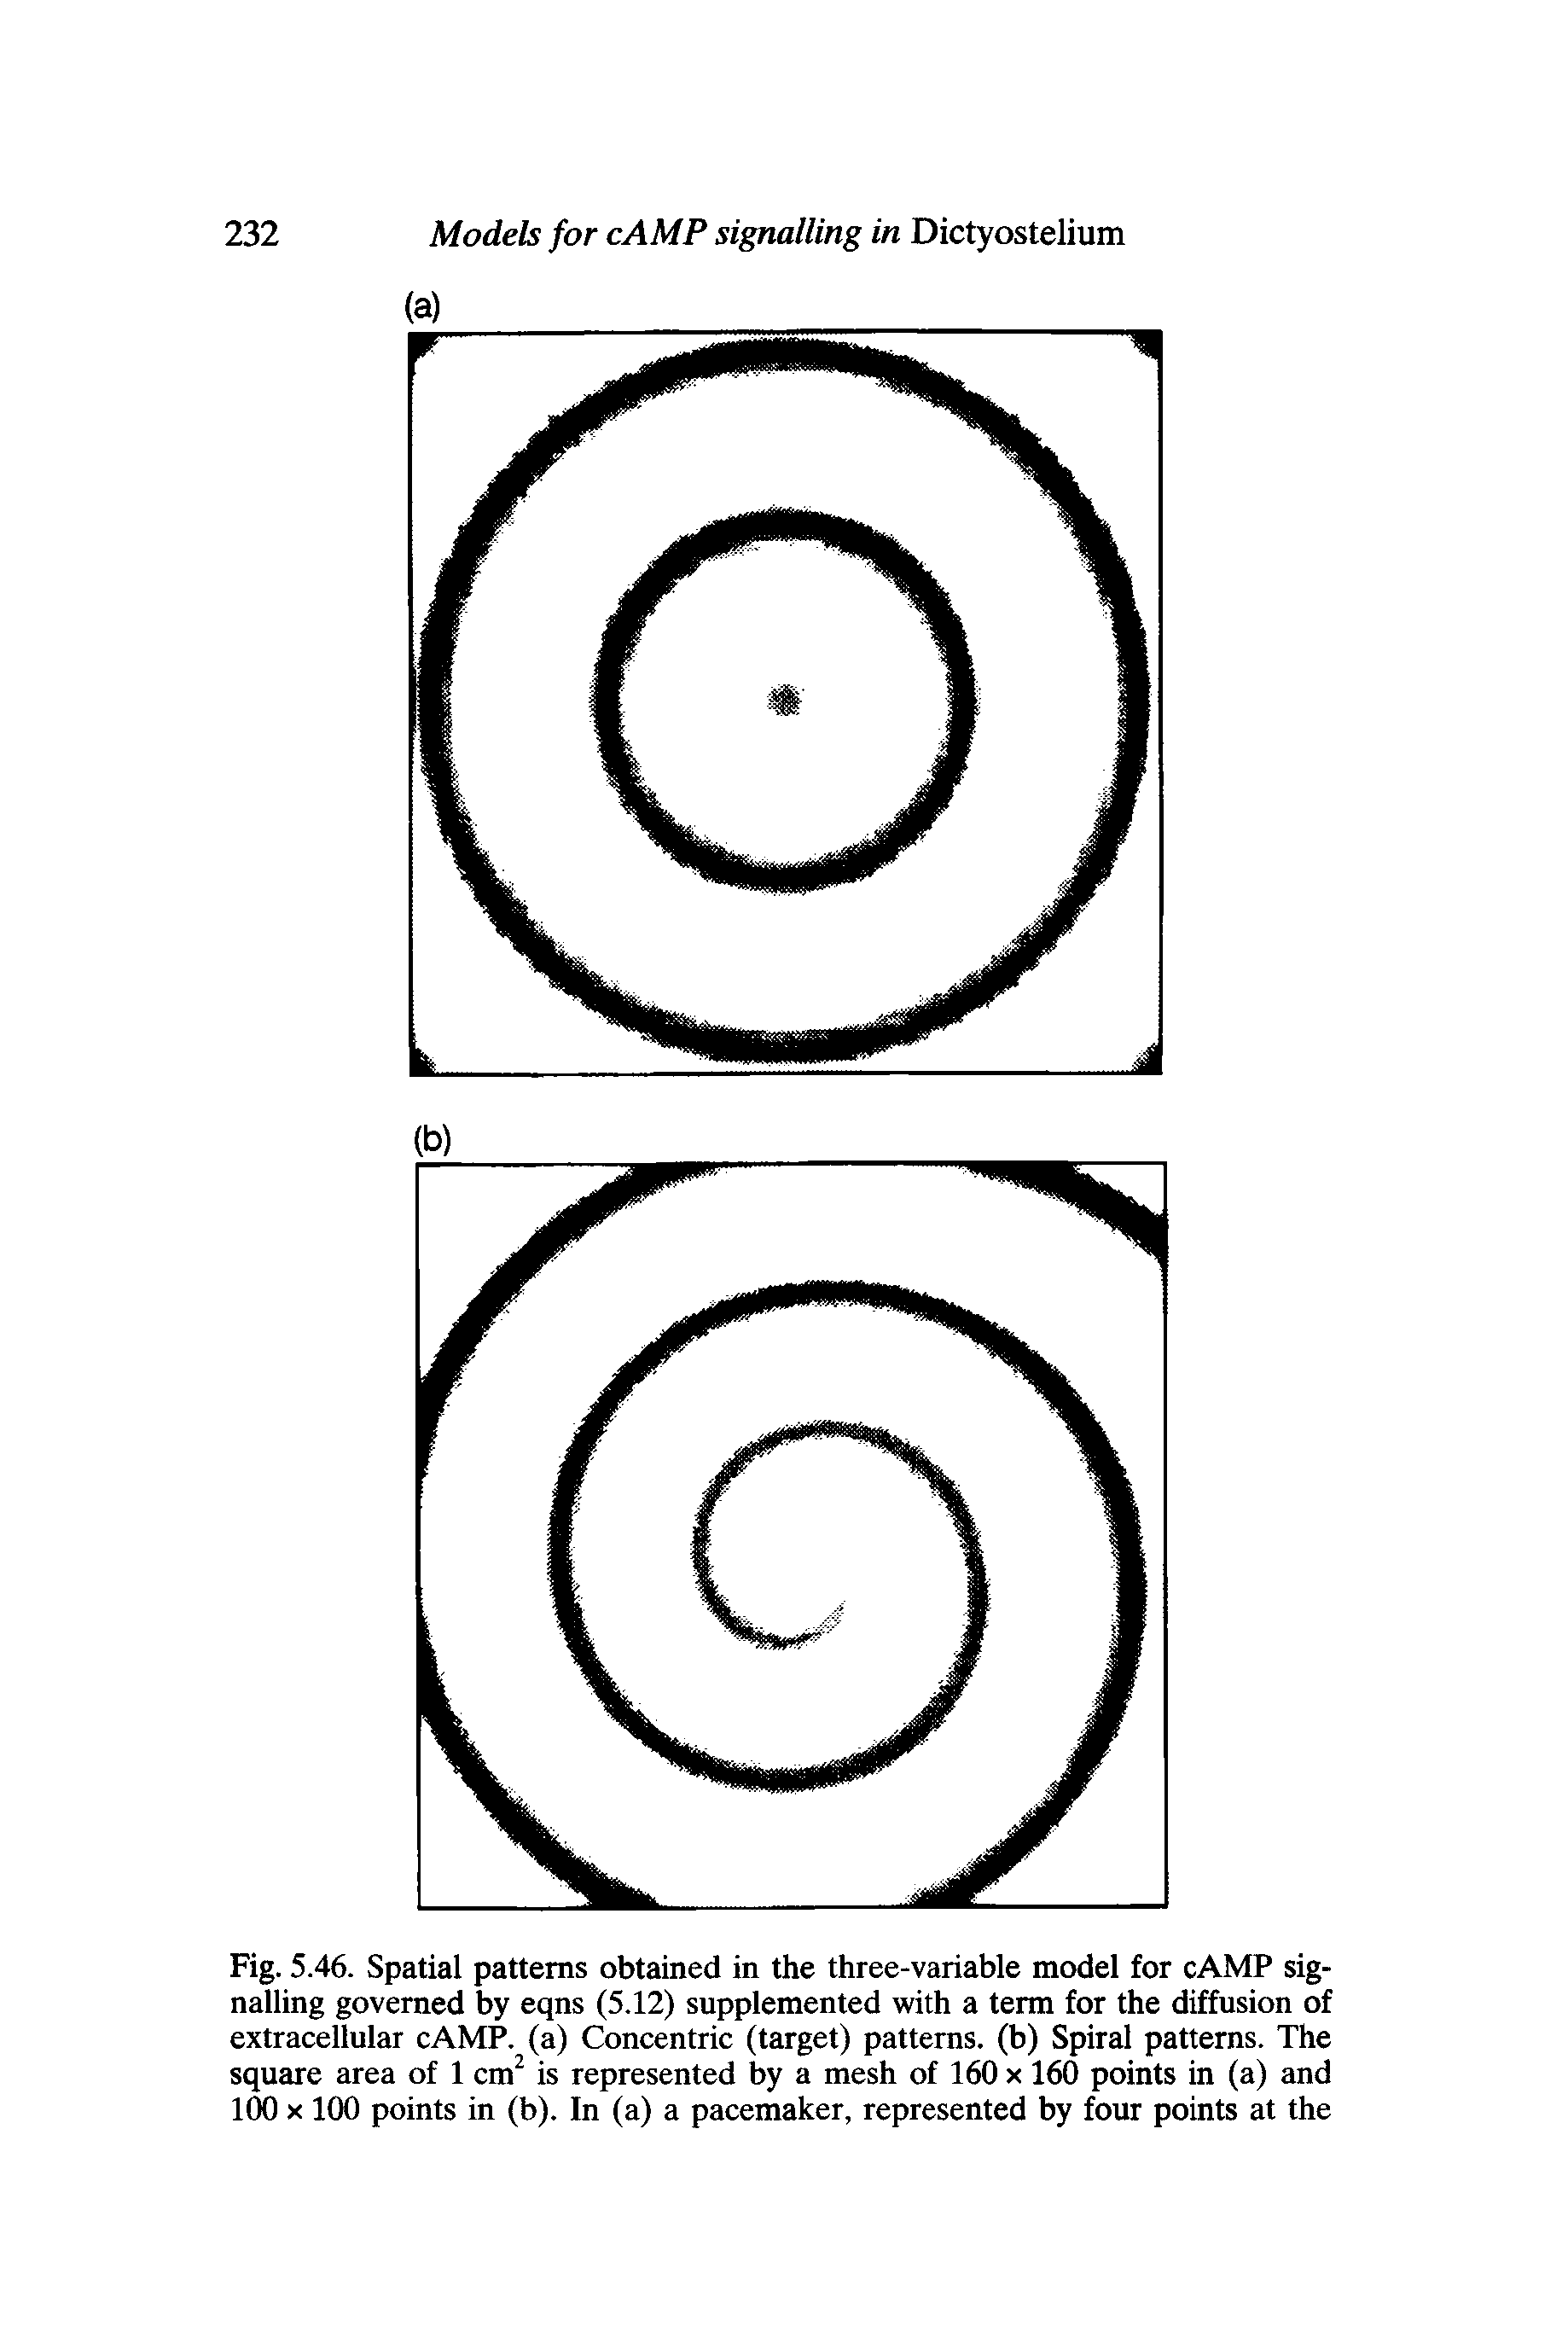 Fig. 5.46. Spatial patterns obtained in the three-variable model for cAMP signalling governed by eqns (5.12) supplemented with a term for the diffusion of extracellular cAMP. (a) Concentric (target) patterns, (b) Spiral patterns. The square area of 1 cm is represented by a mesh of 160 x 160 points in (a) and 100 X 100 points in (b). In (a) a pacemaker, represented by four points at the...